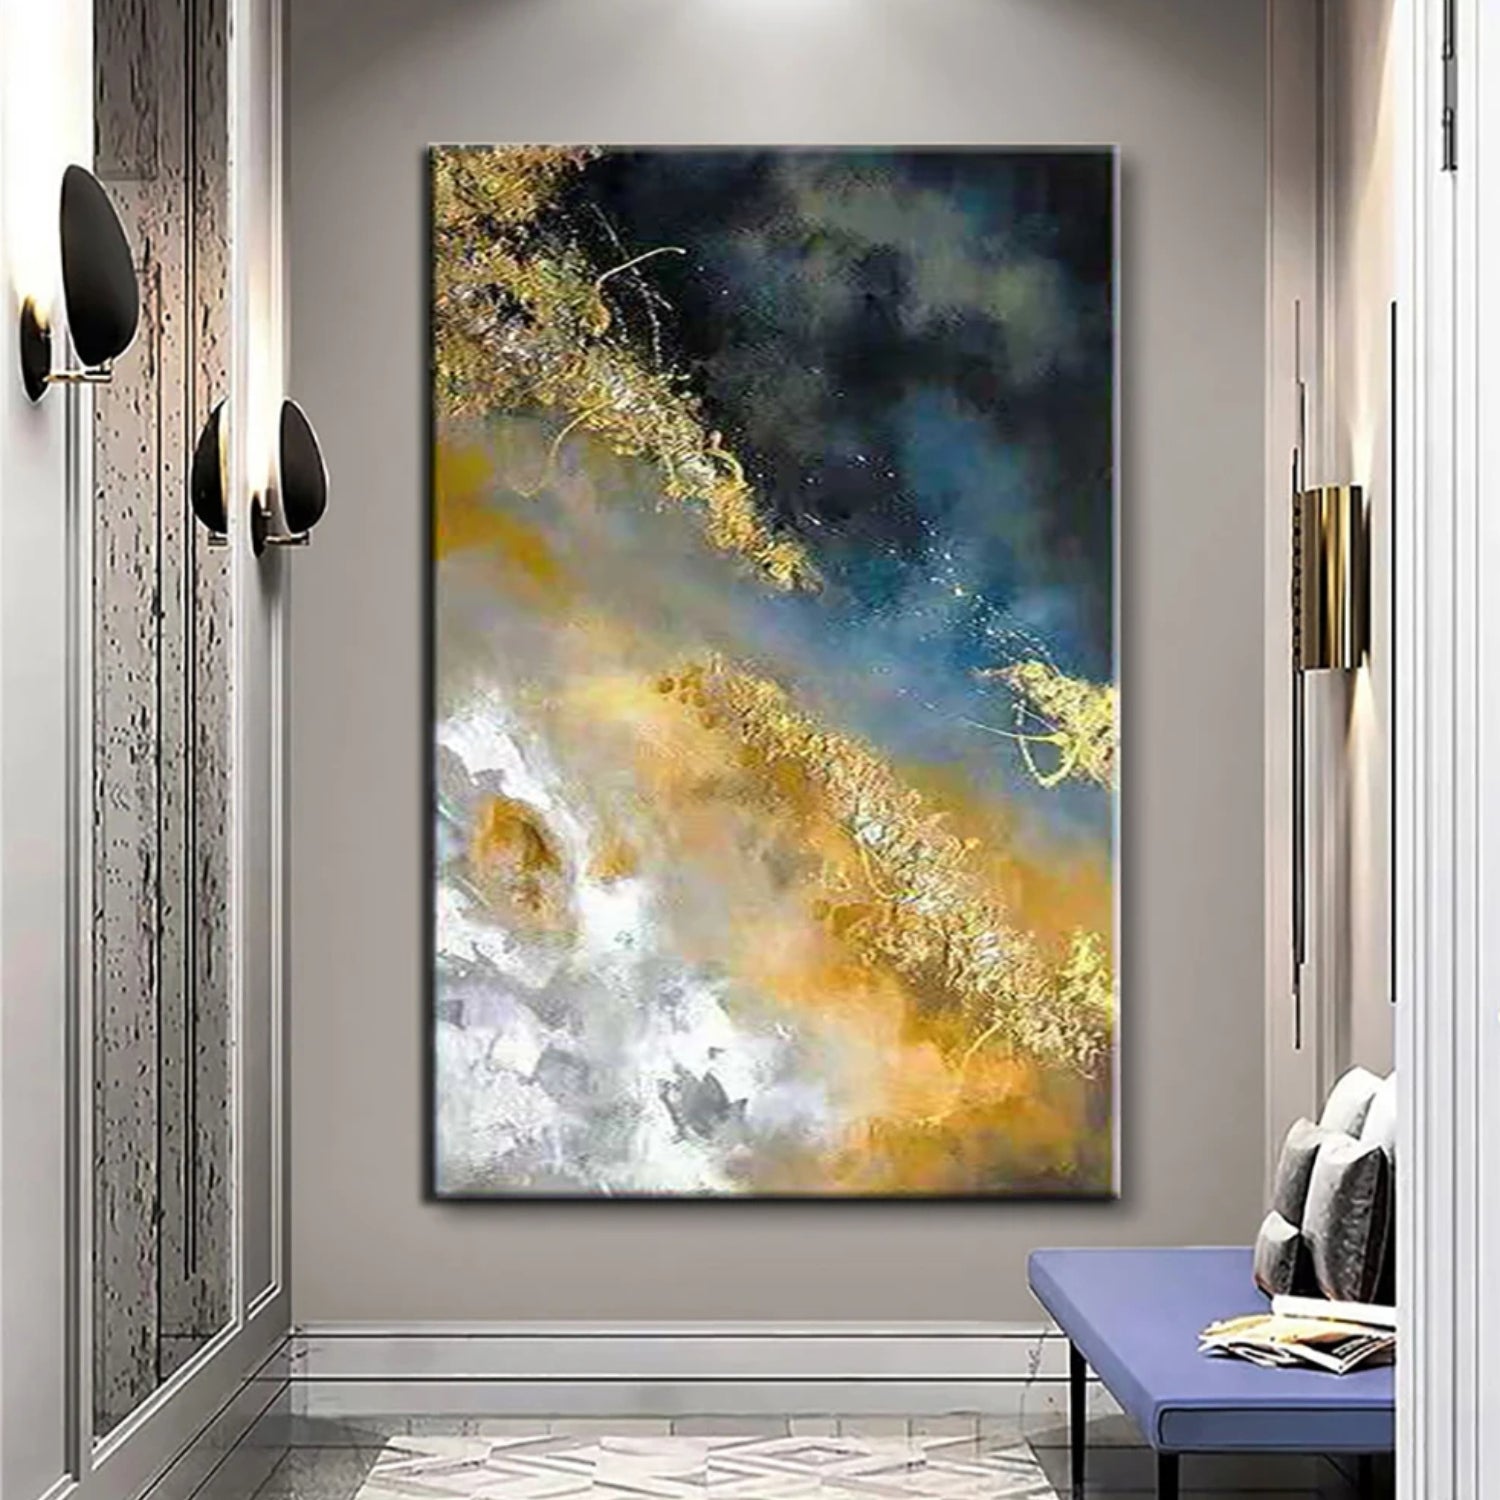 Contemporary Gold Foil Stormy Skyscape Modern Wall Art